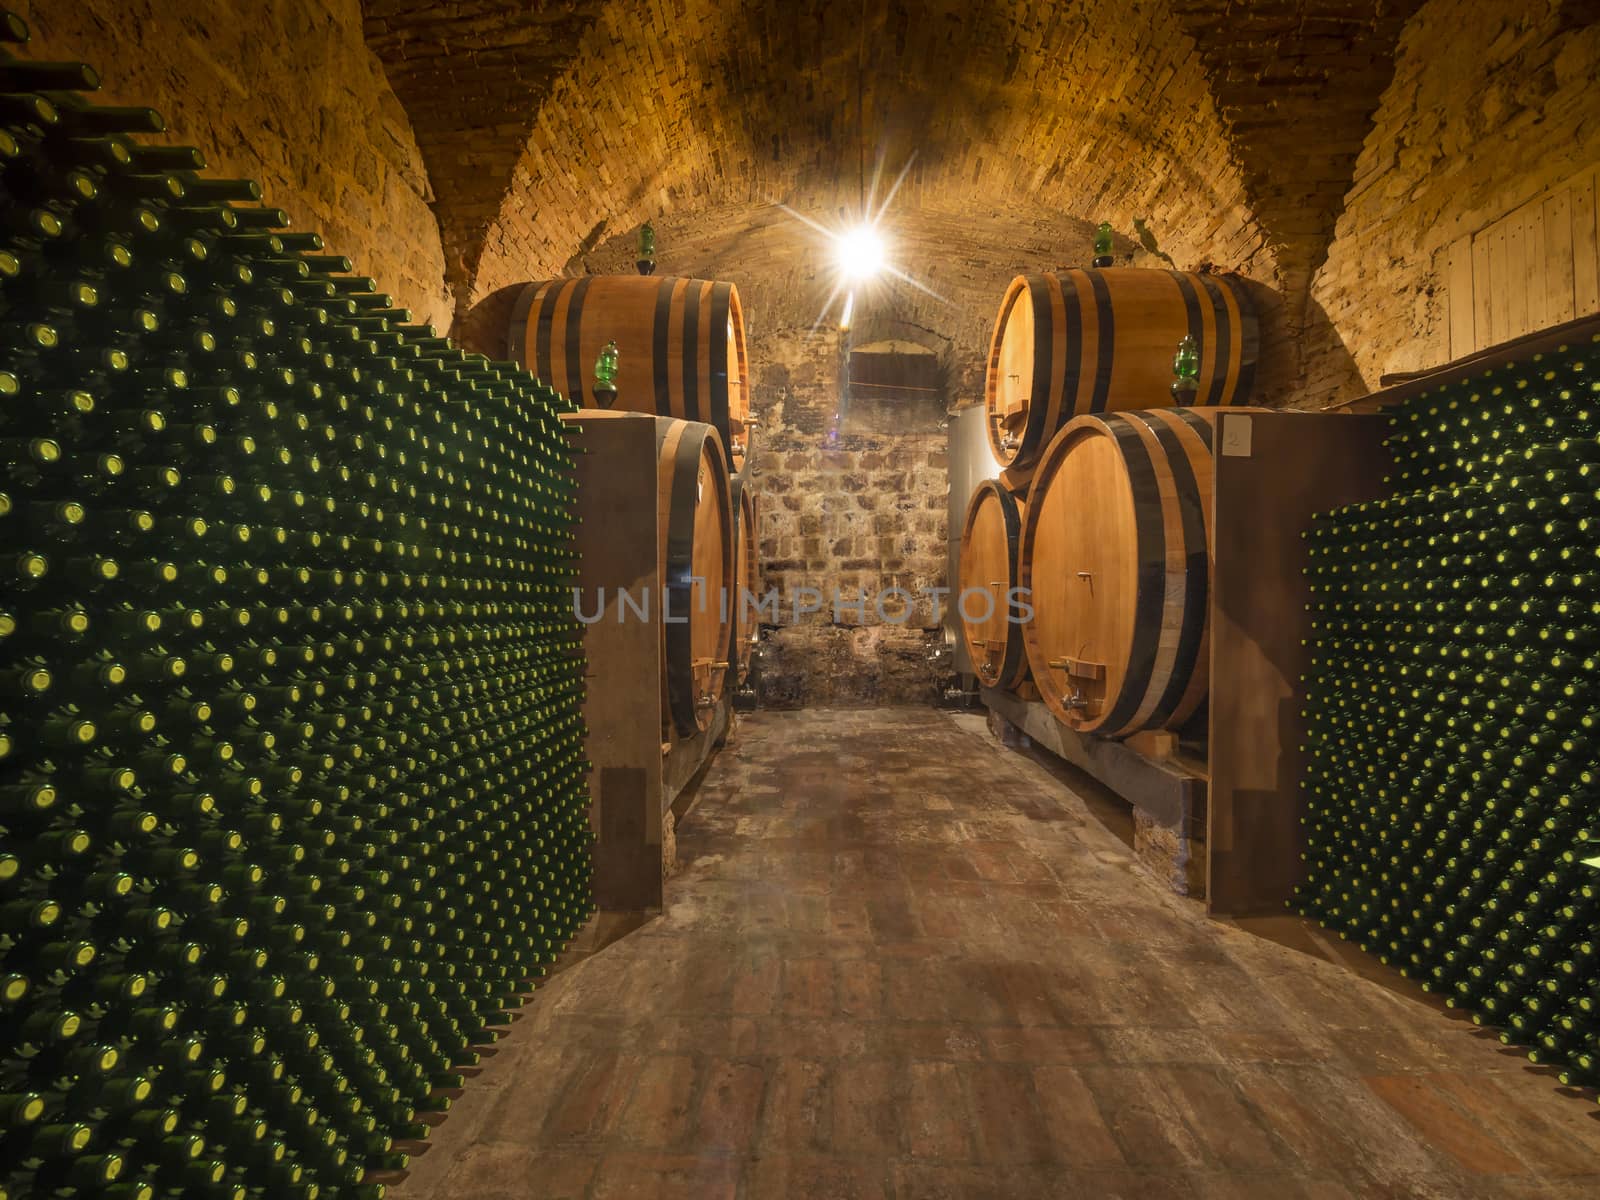 Wine bottles and barrels in a Tuscan winery cellar